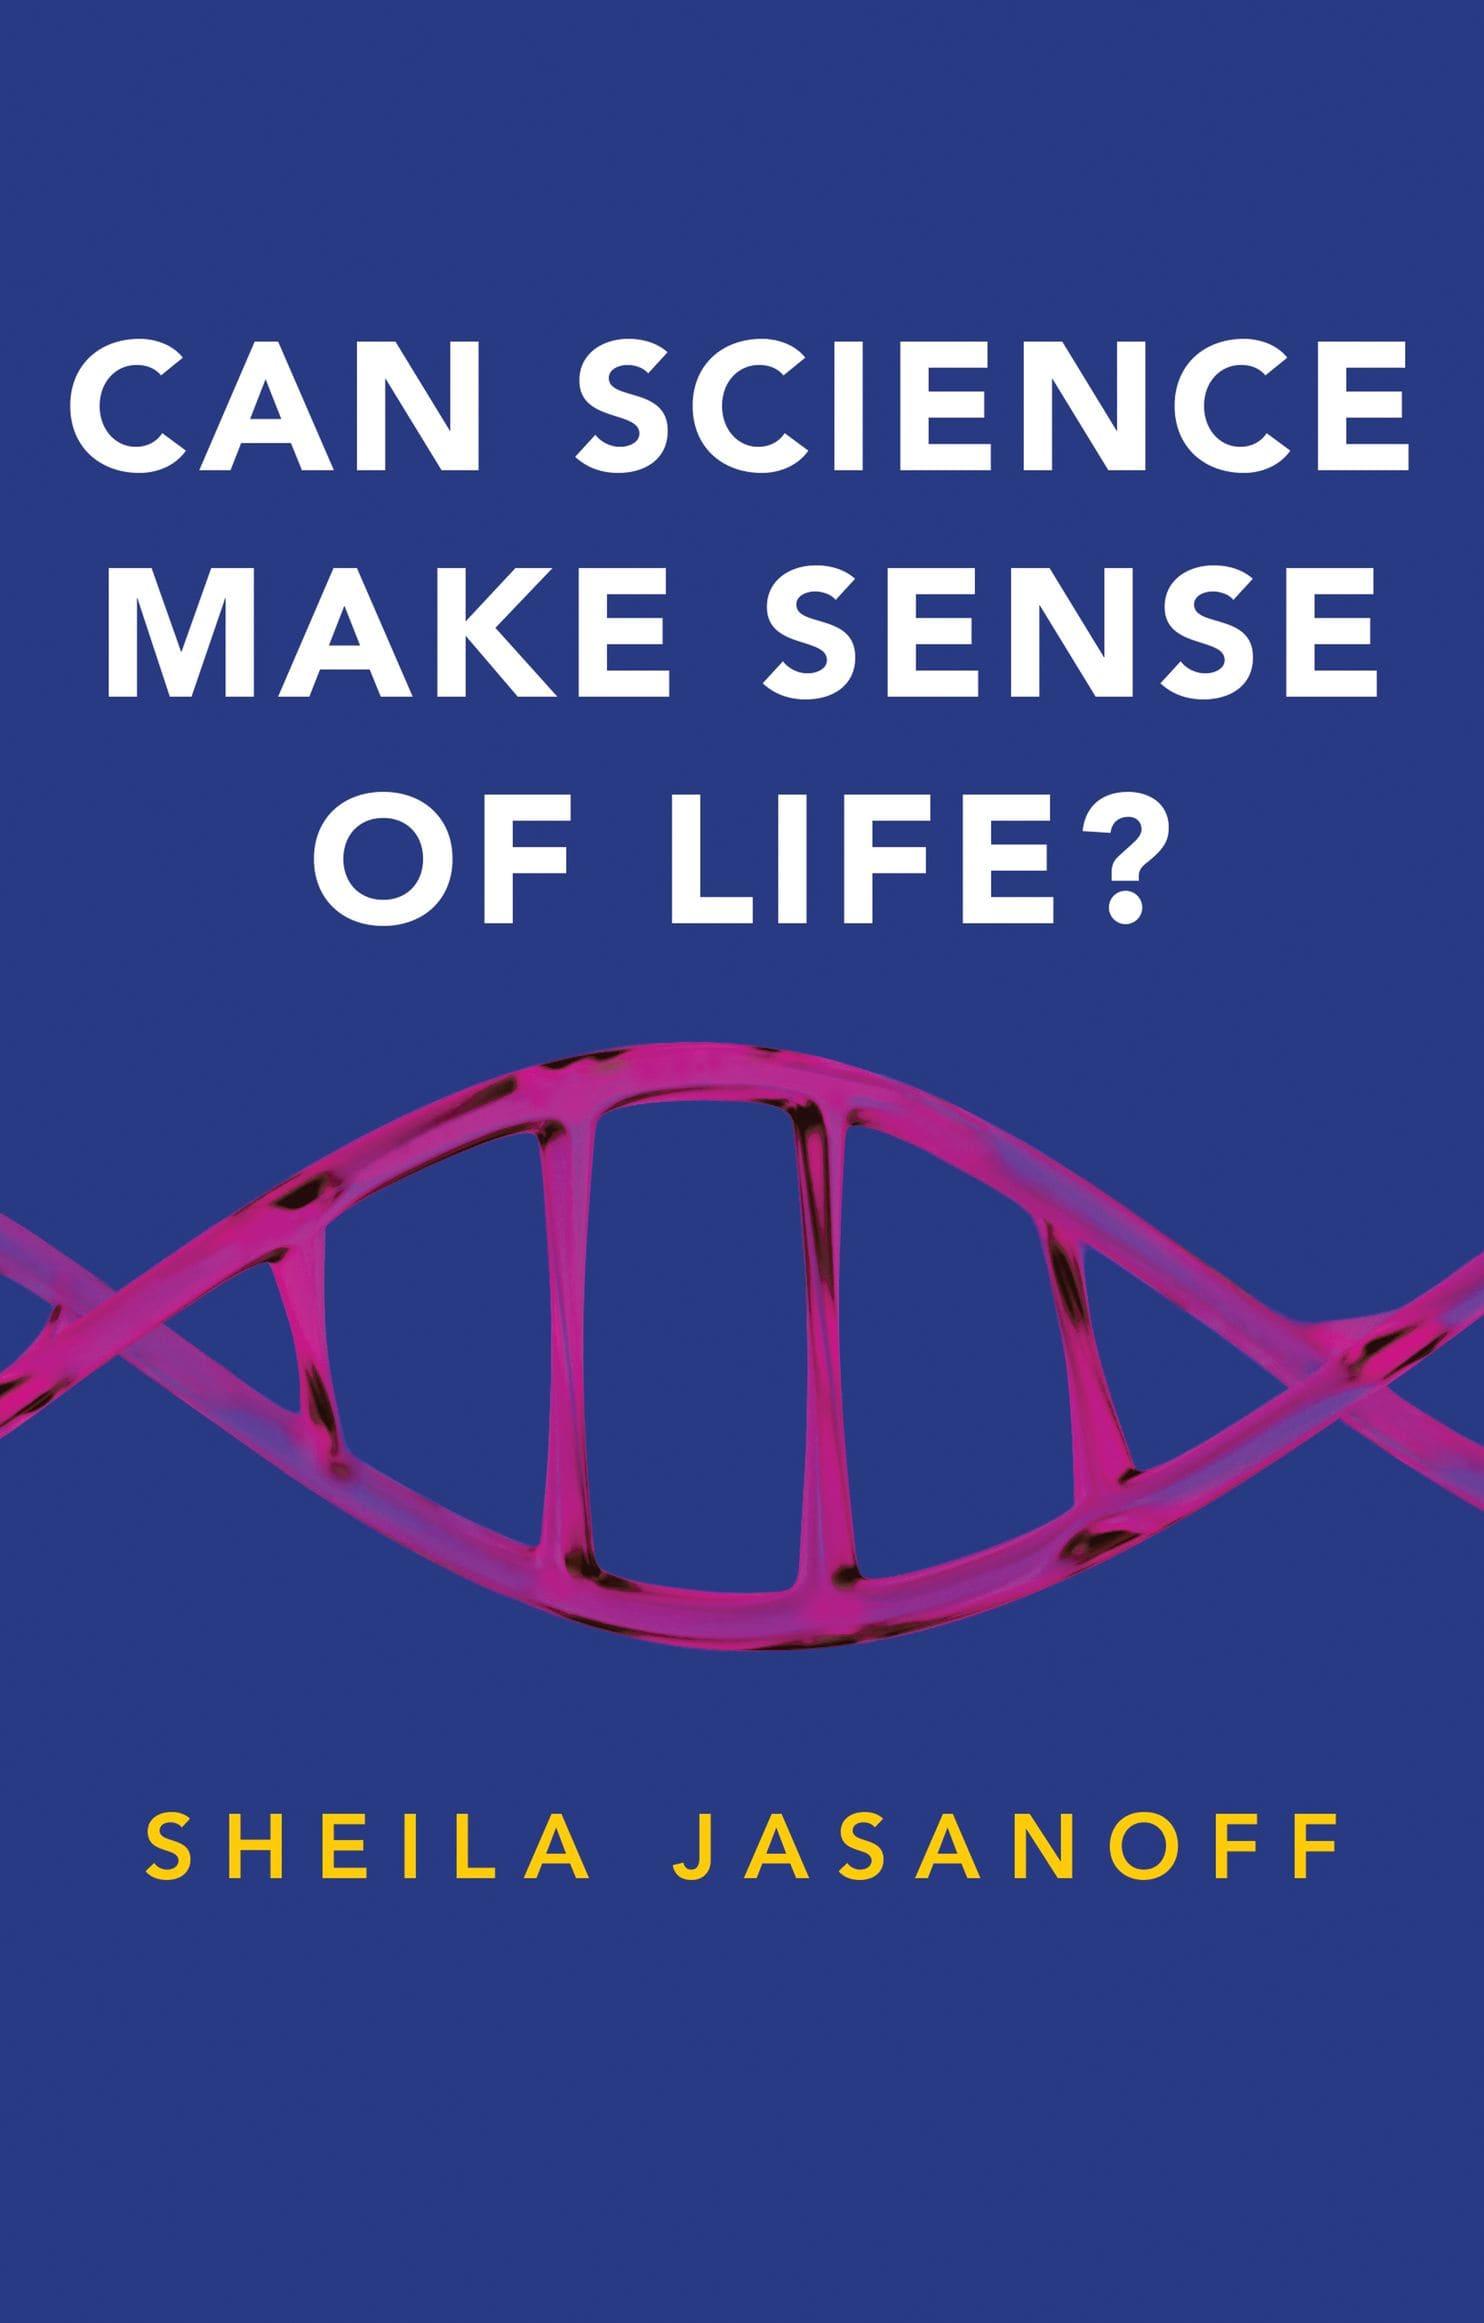 purple book cover for "Can Science Make Sense of Life"